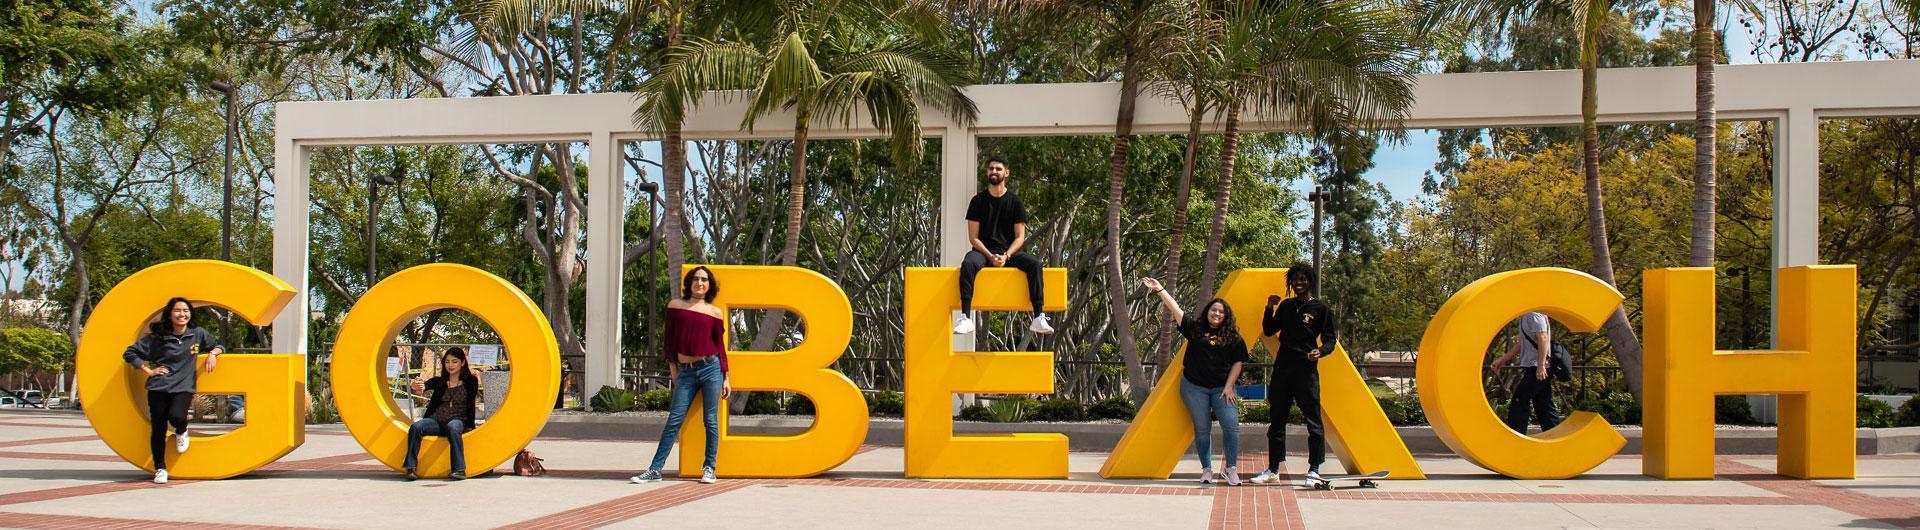 Go Beach sign with students posing